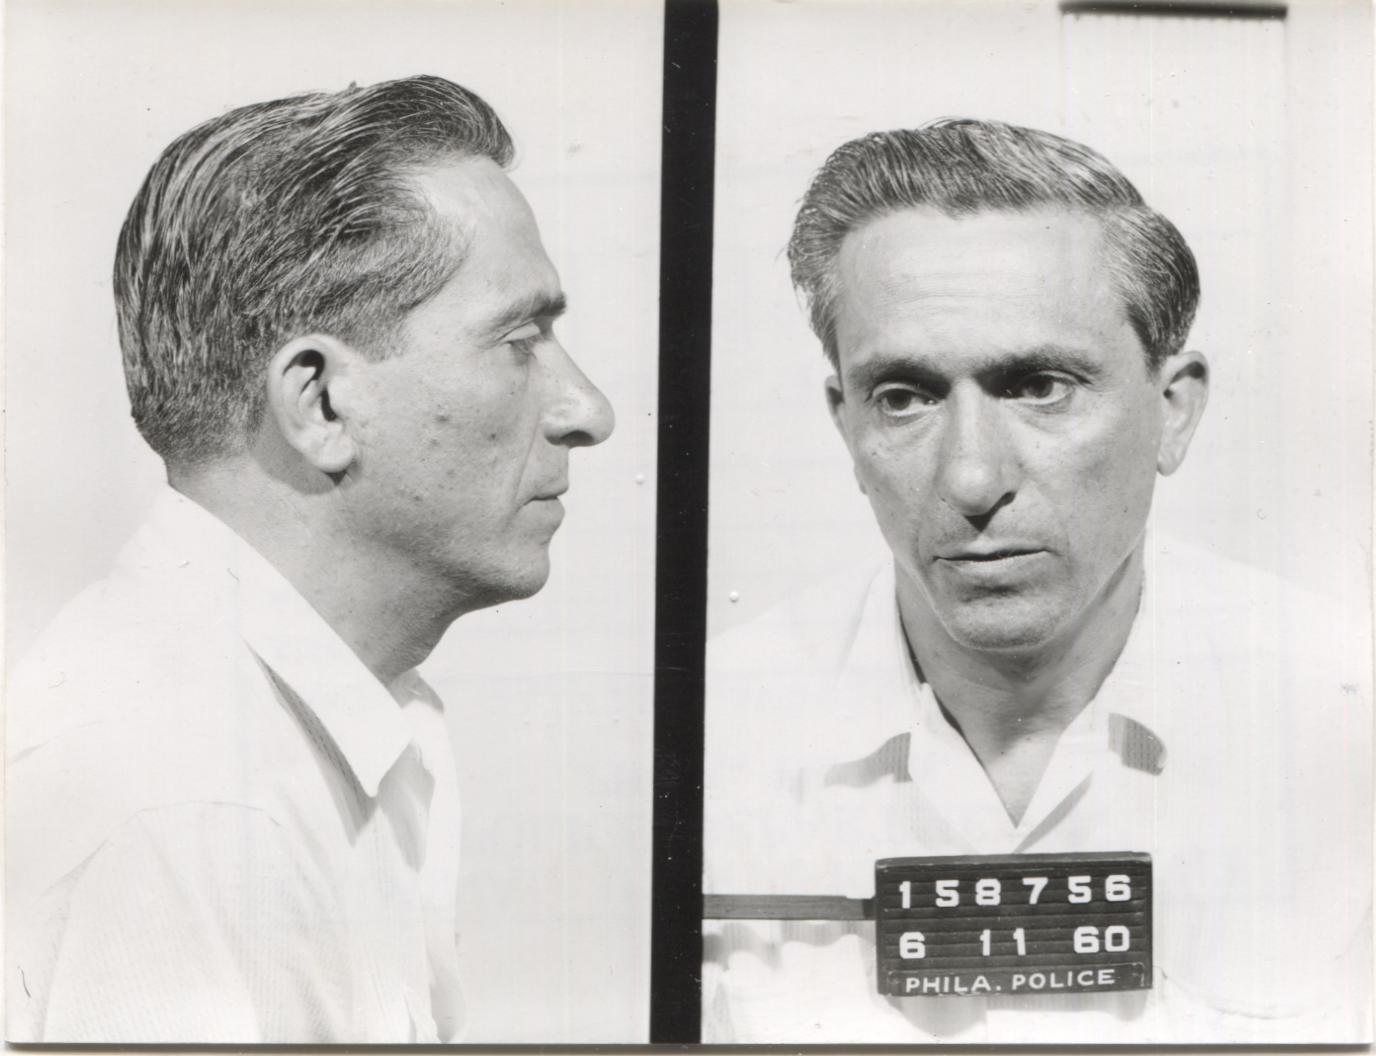 Silvio Lovuolo Mugshot - Arrested on 6/11/1960 for Illegal Lottery